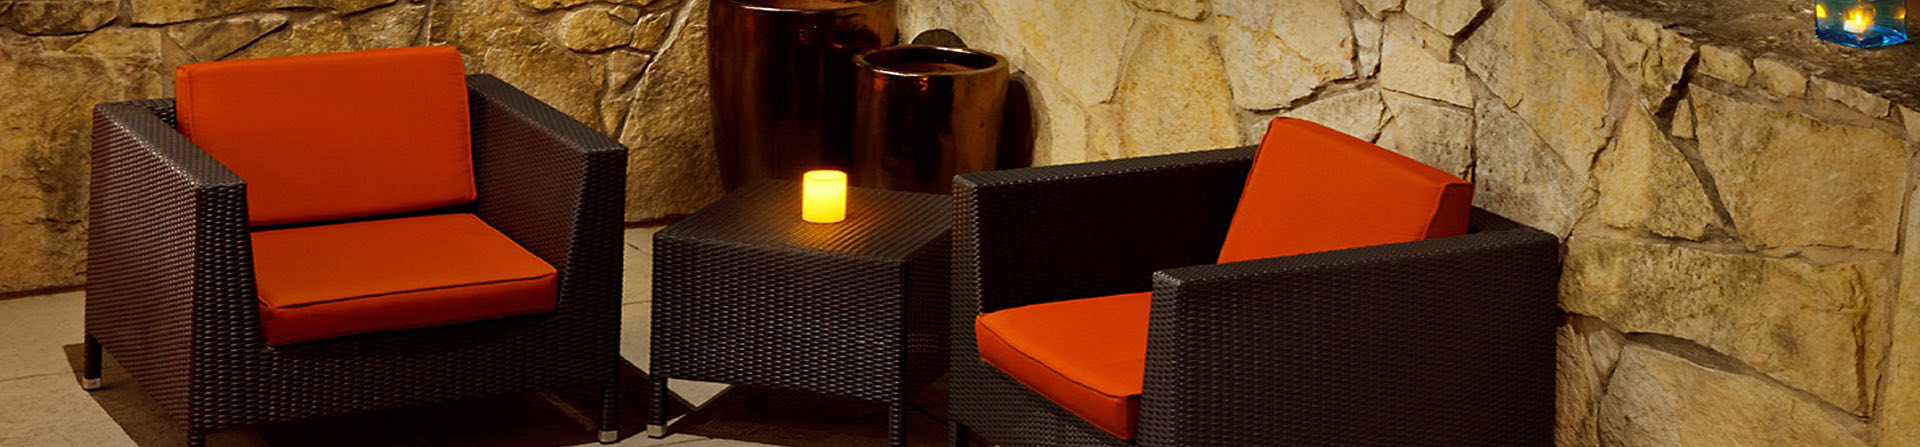 close up of outdoor furniture with orange cushions